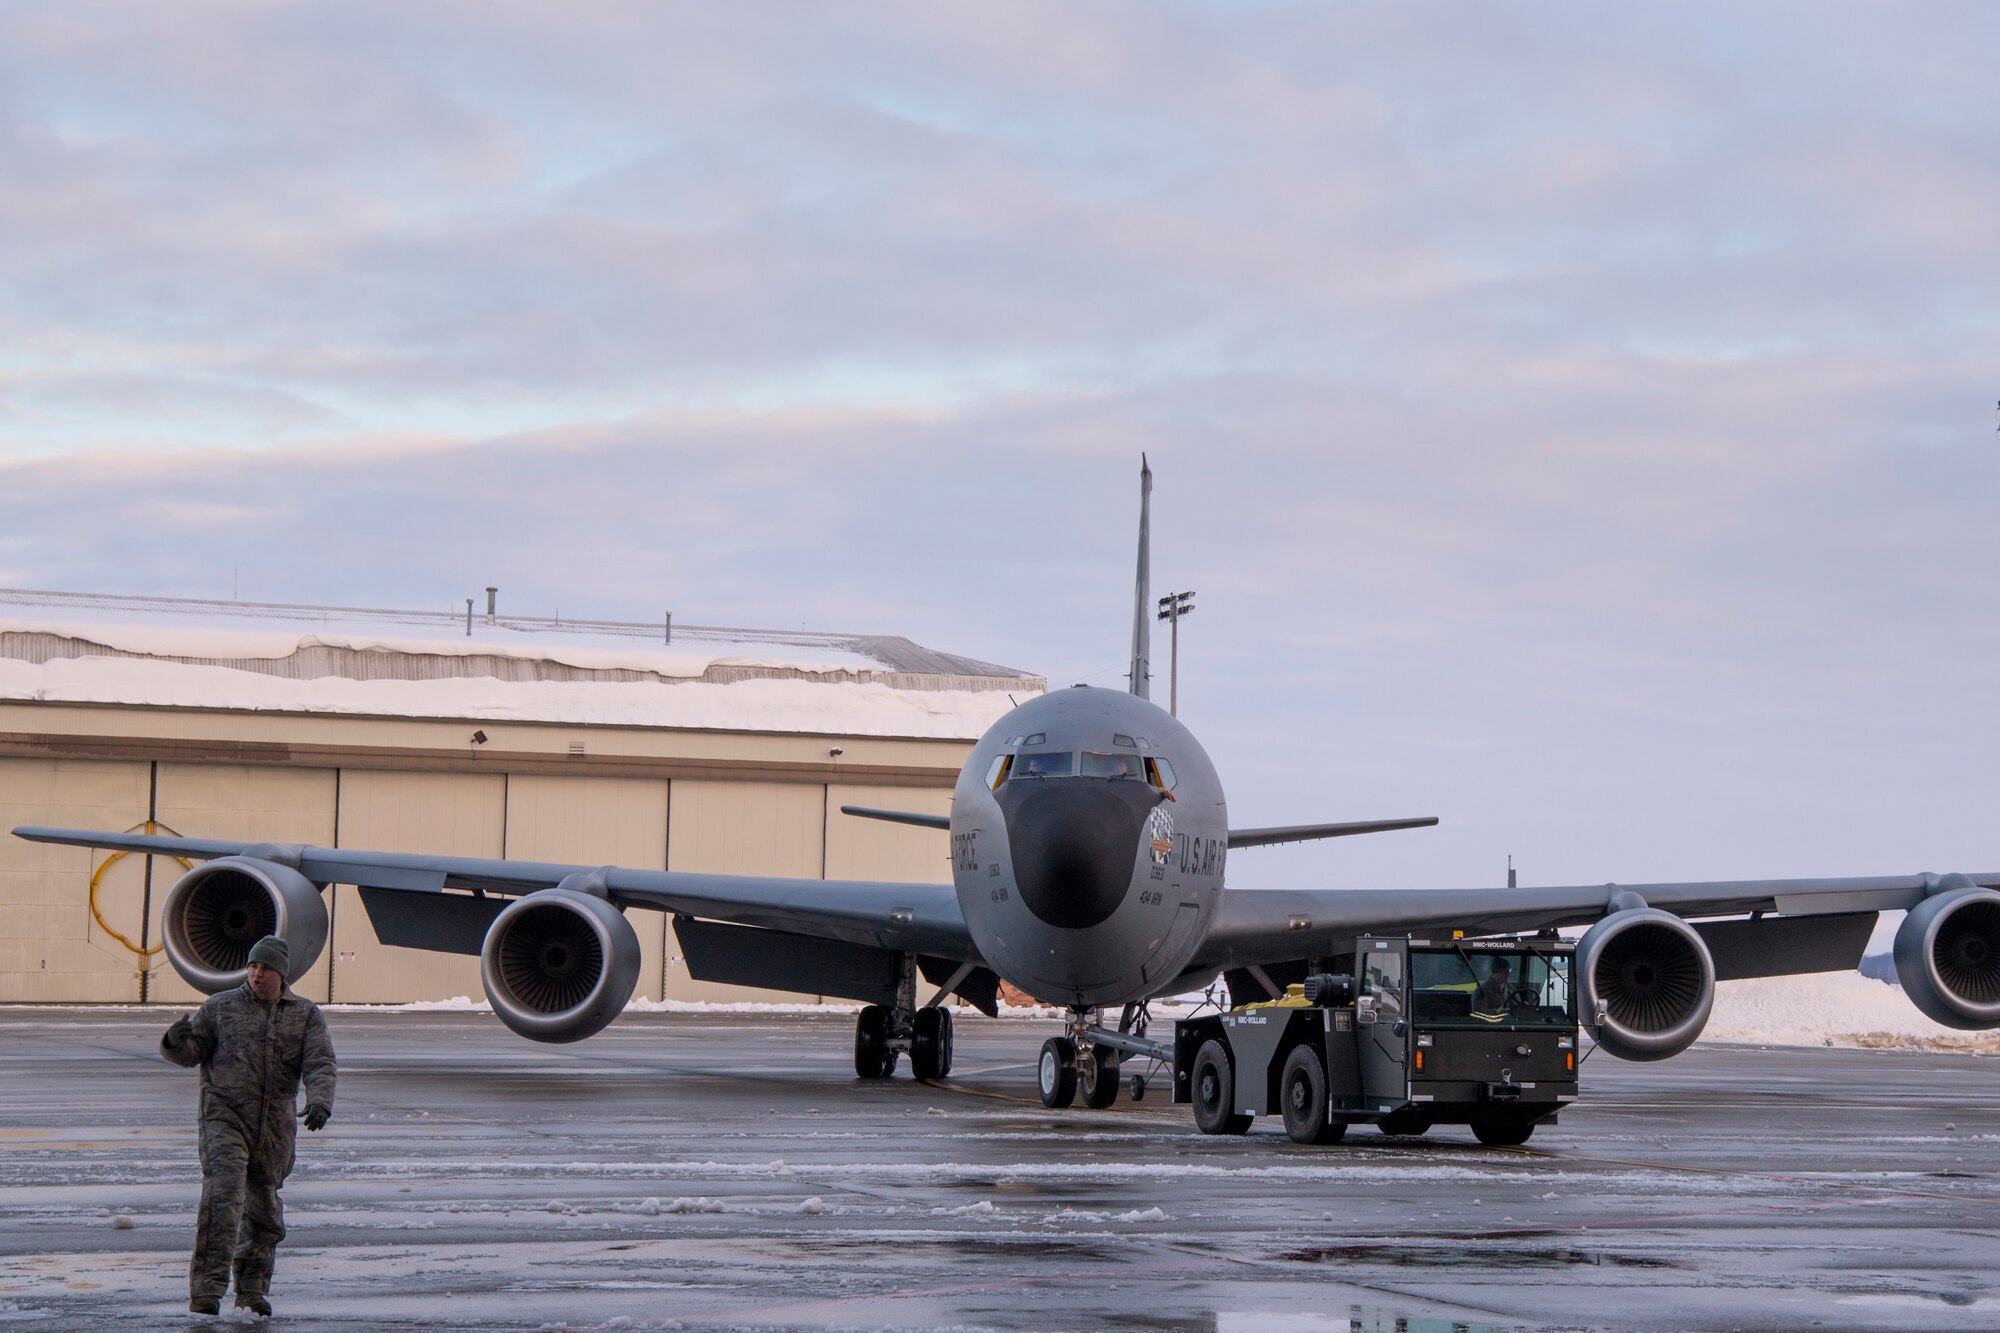 A KC-135R Stratotanker is taxed into a dock at Grissom Air Reserve Base, Indiana, Jan. 13, 2018. Team Grissom rallied to help get 18 deployers home on time despite weather and mechanical obstacles. (U.S. Air Force photo/Master Sgt. Ben Mota)